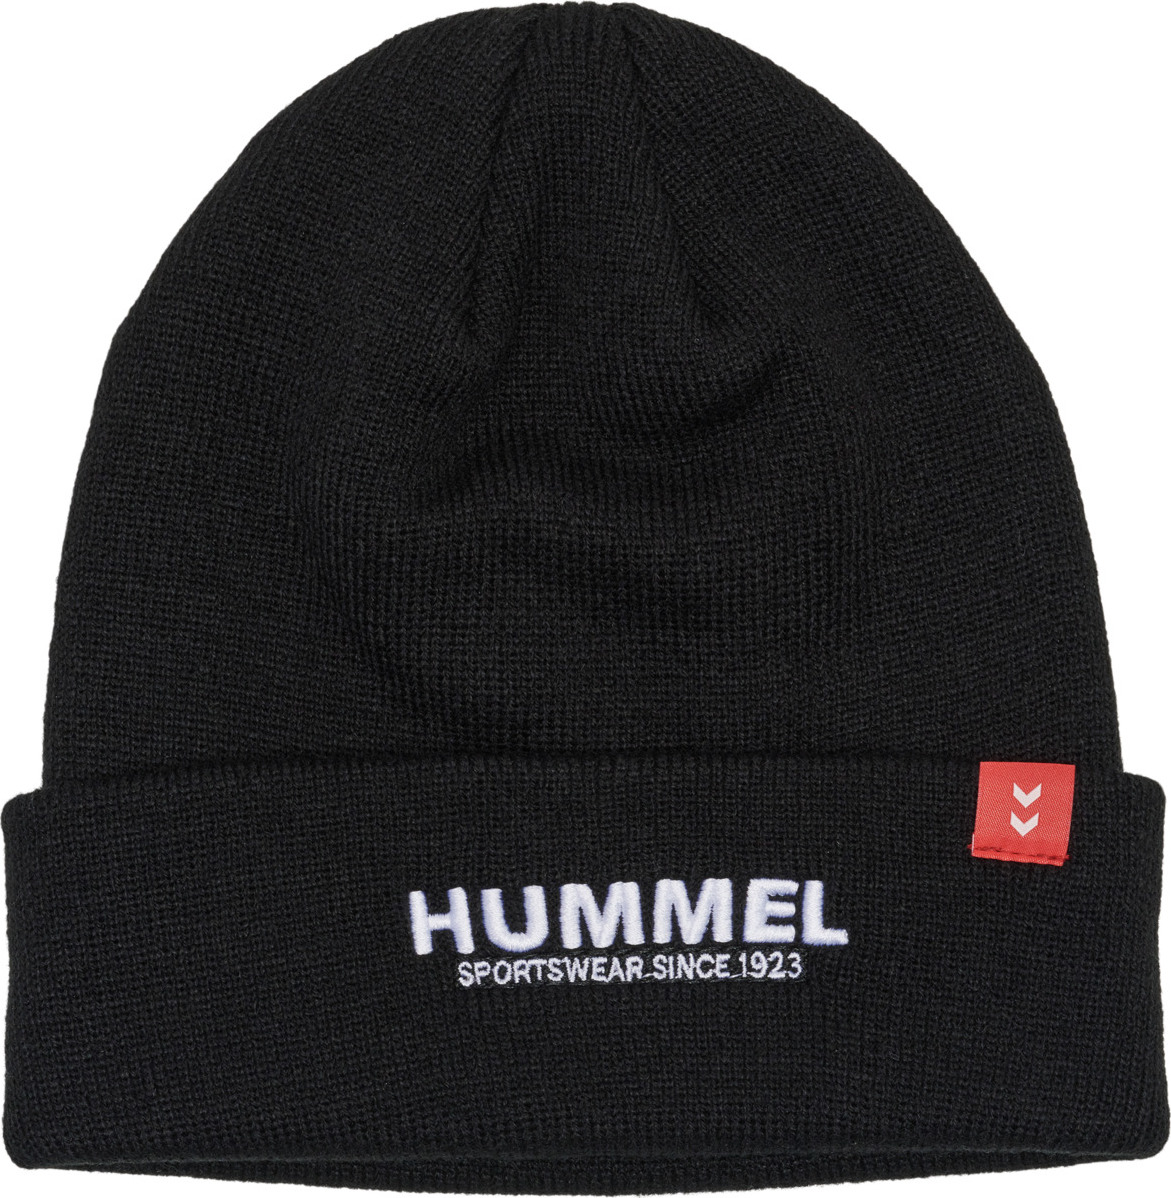 | Buy Core Beanie here hmlLEGACY Outnorth Black hmlLEGACY Beanie | Black Core